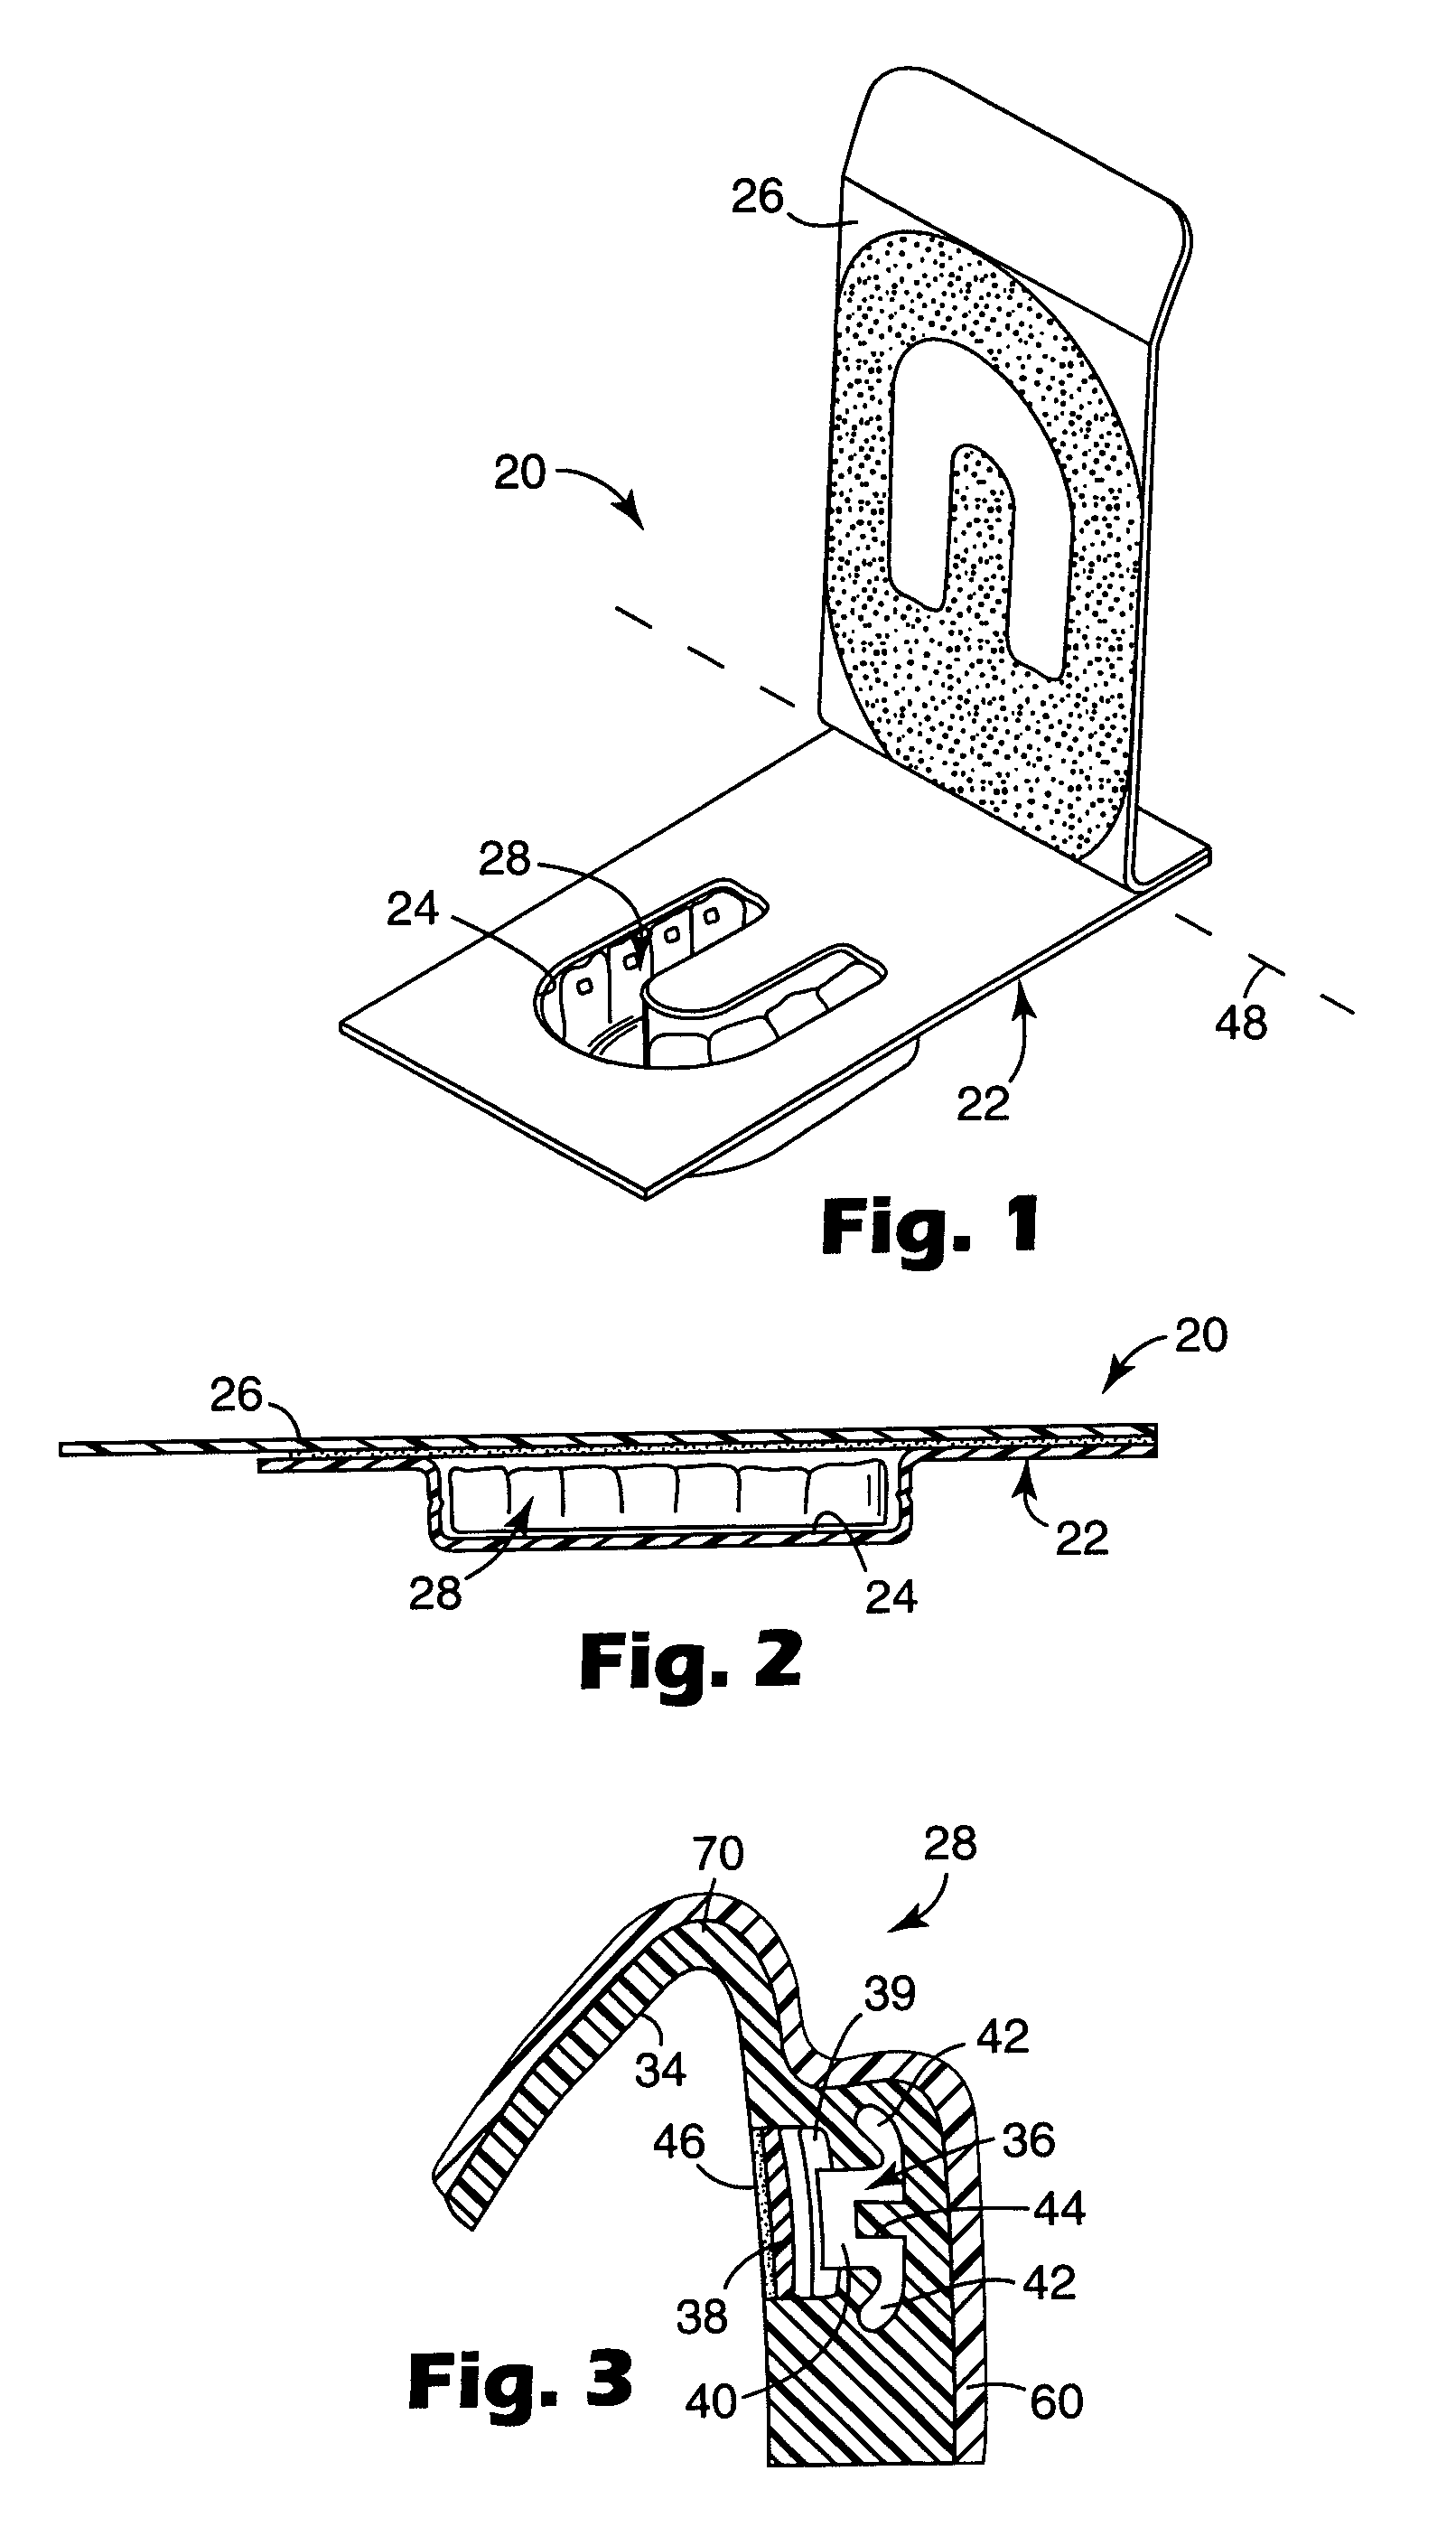 Apparatus for indirect bonding of orthodontic appliances and method of making the same